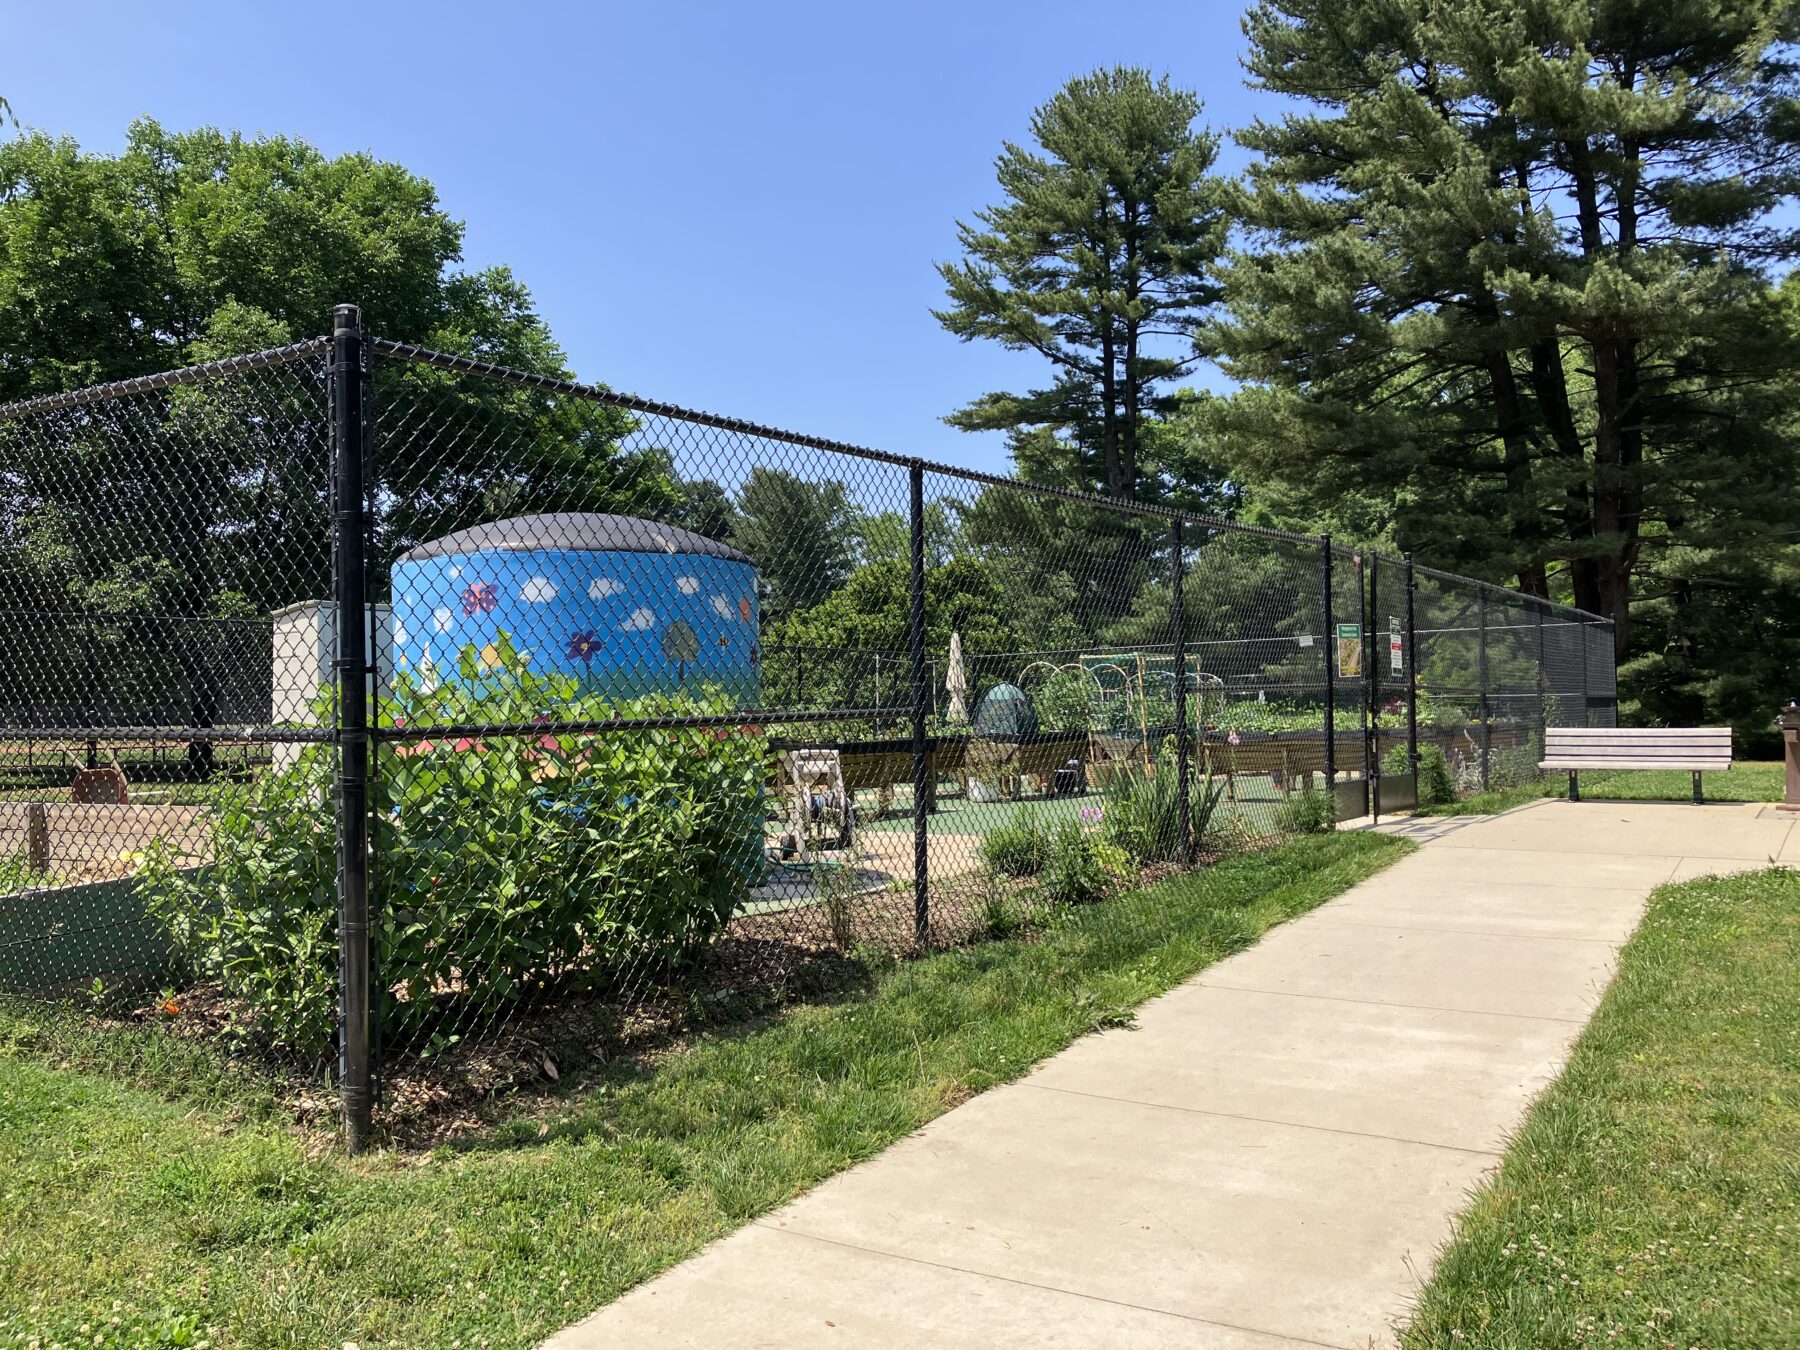 view of Nolte Community Garden from outside of the fence, showing the painted cistern and flowers